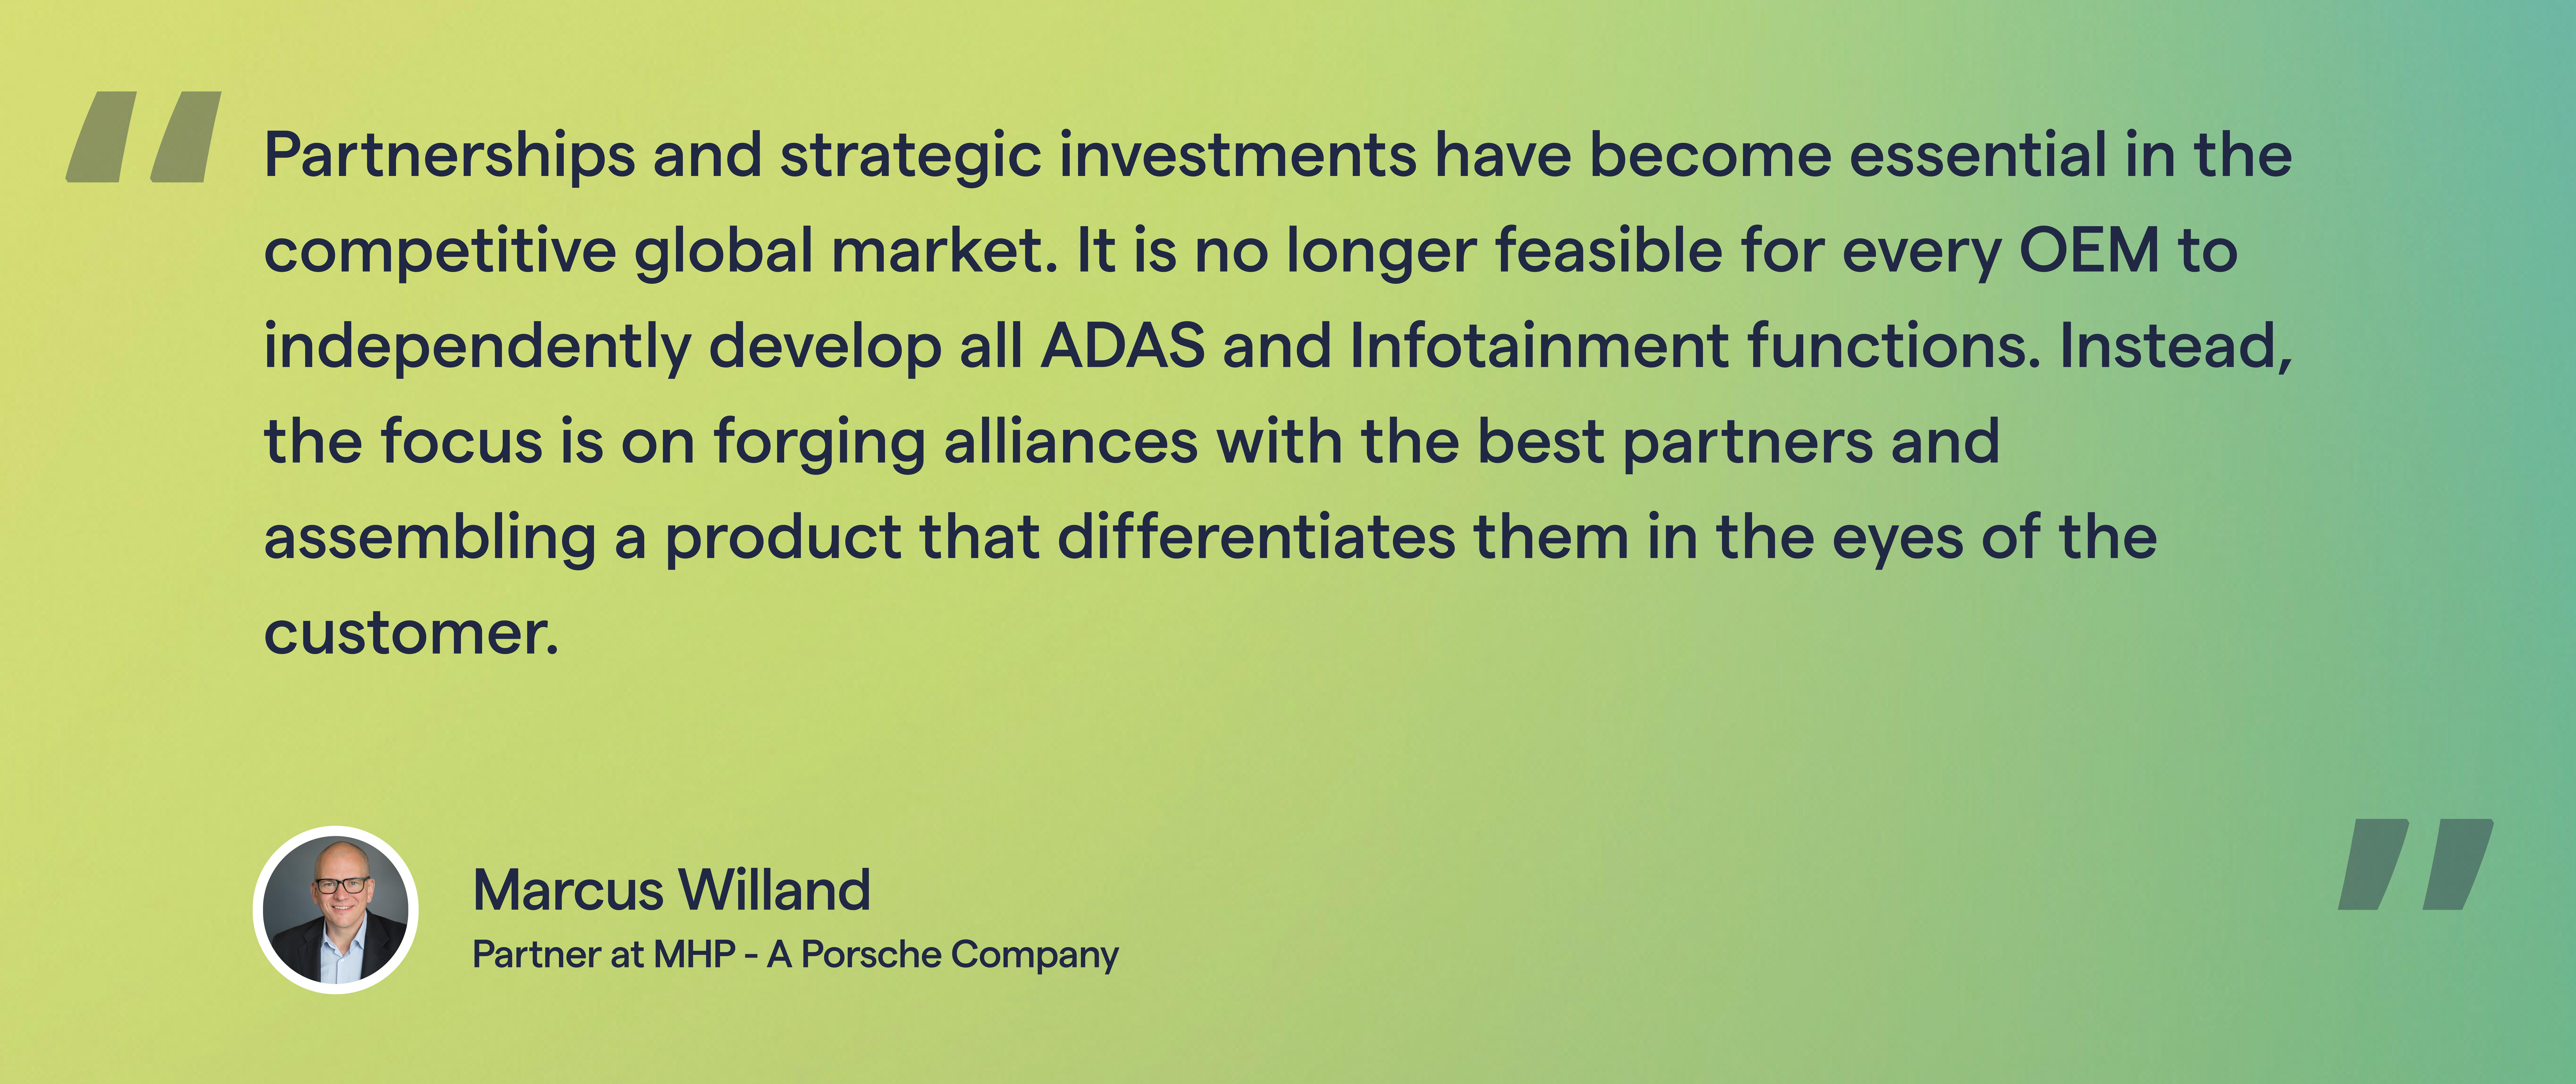 partnerships and strategic investments have become essential for success in the automotive industry